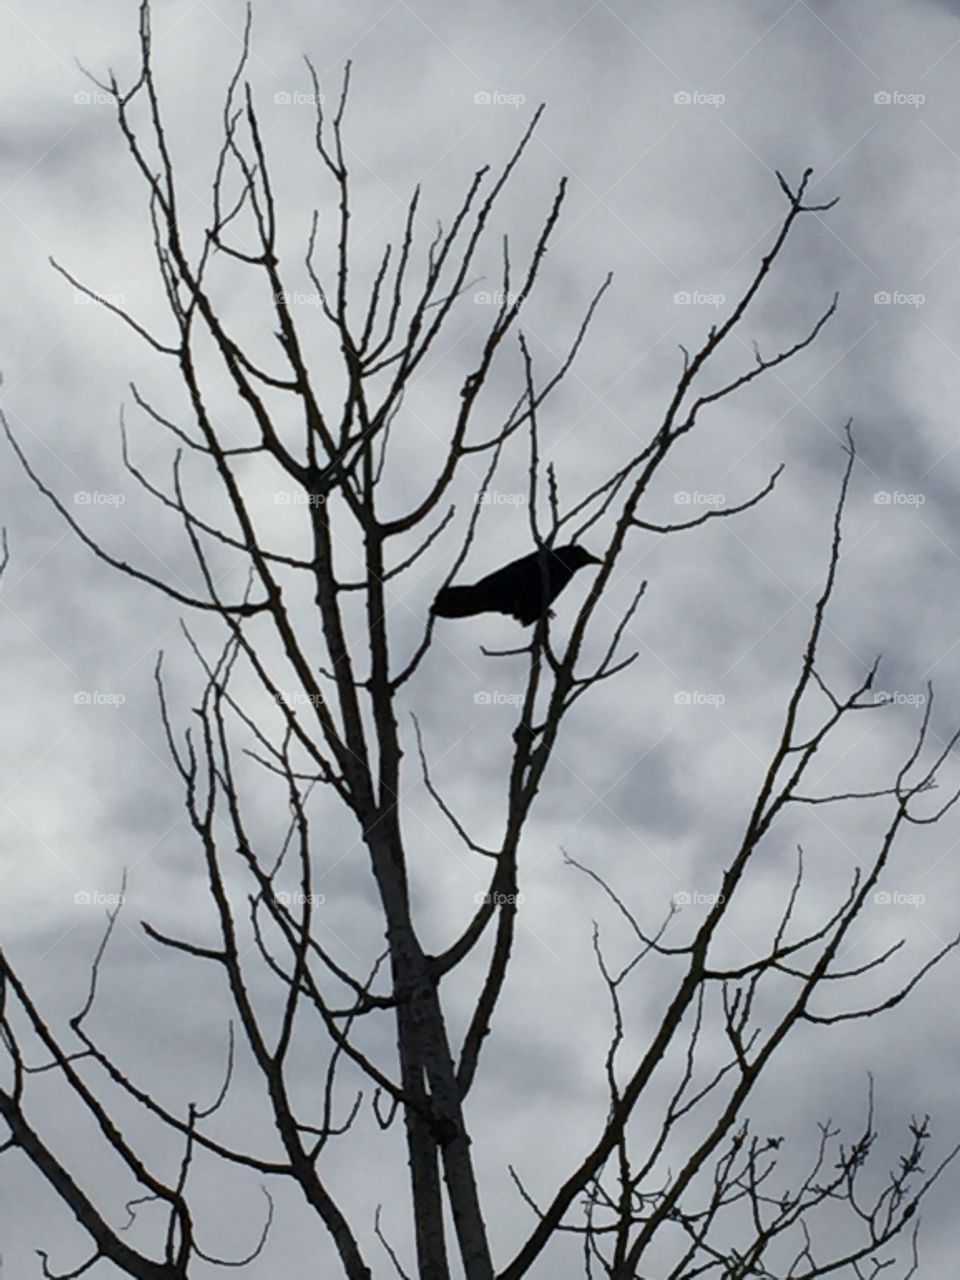 A large raven in the tree today claiming his territory they can be nosy that time .